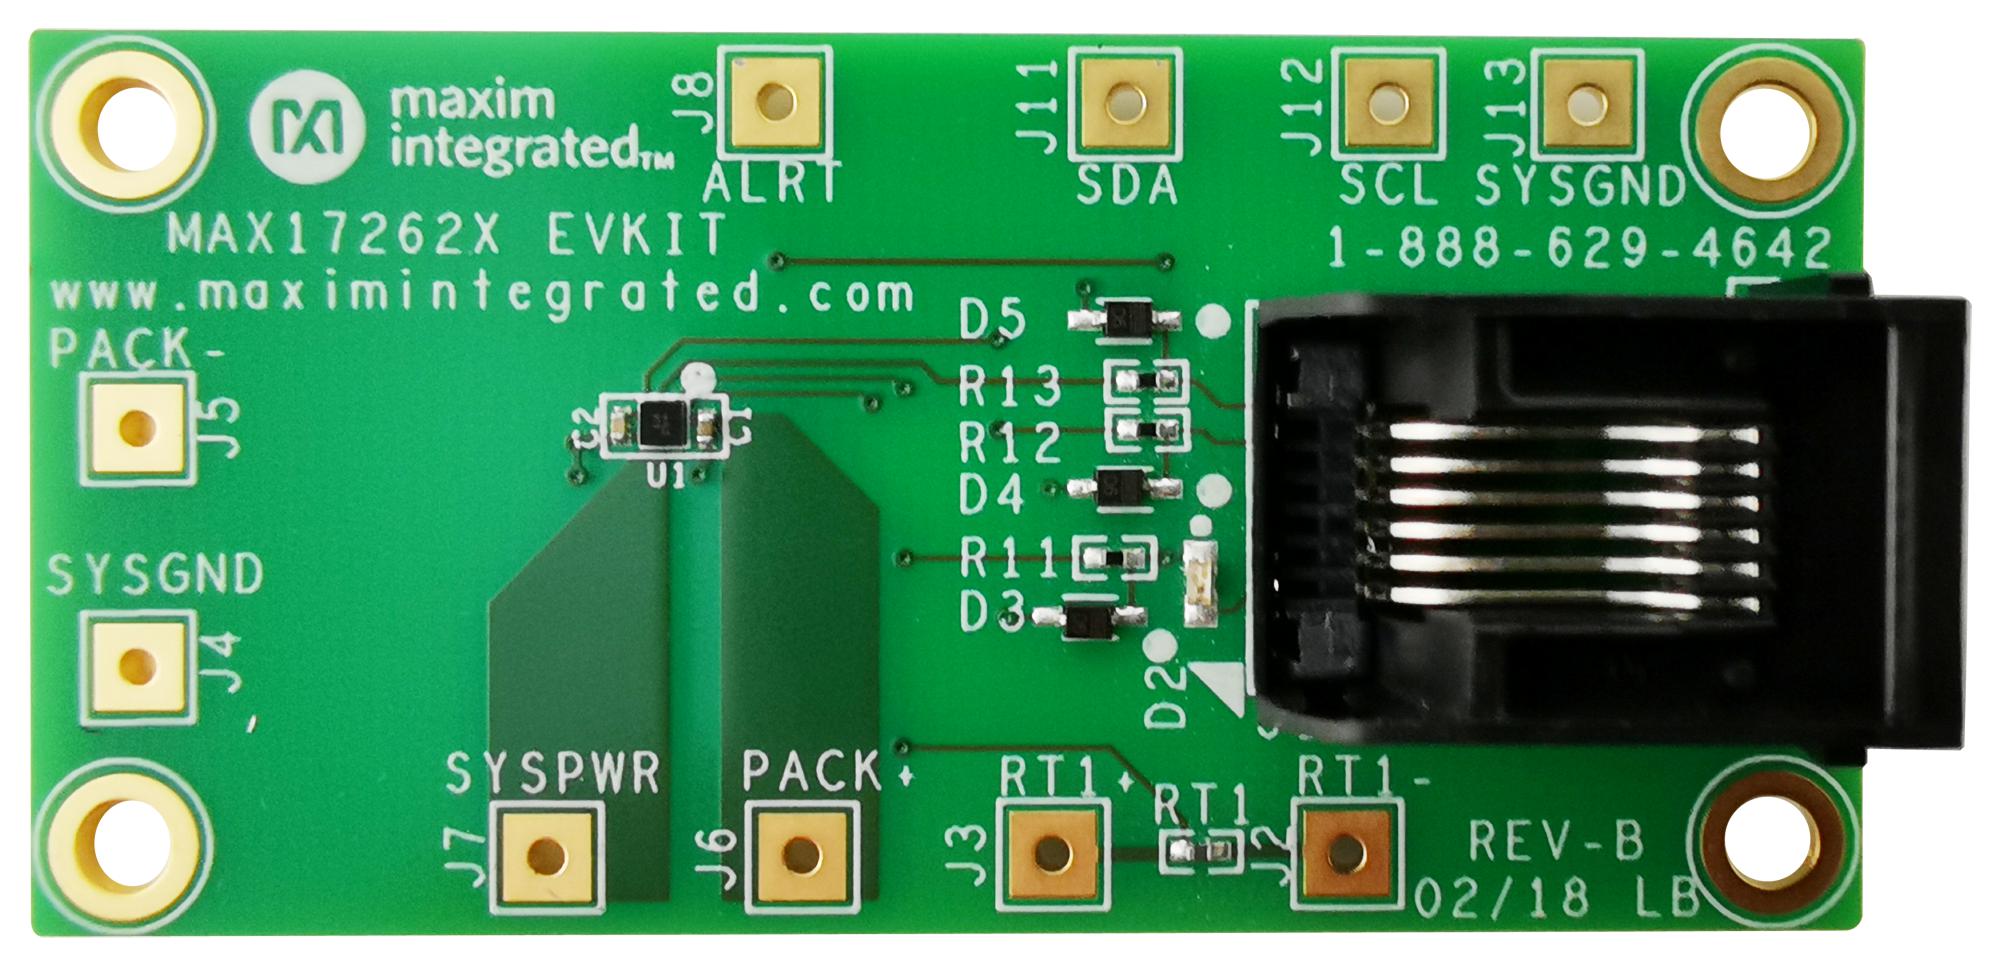 MAX17262XEVKIT# EVAL KIT, FUEL-GAUGE, LI-ION BATTERY MAXIM INTEGRATED / ANALOG DEVICES